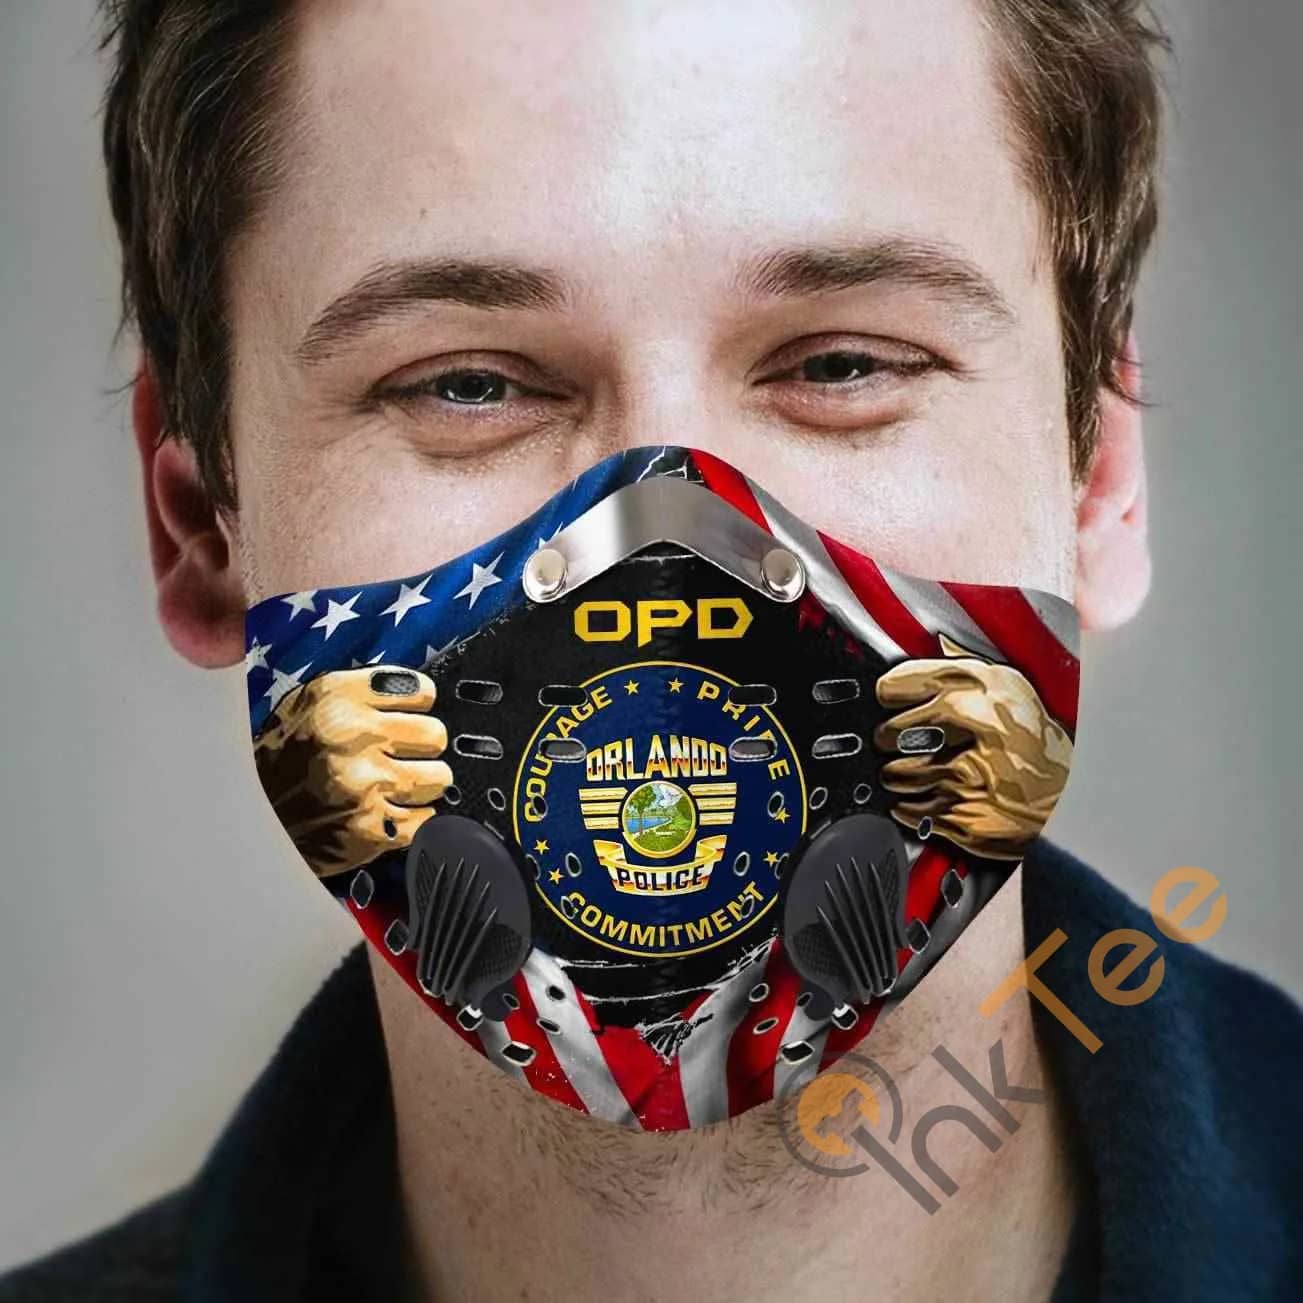 Orlando Police Department Filter Activated Carbon Pm 2.5 Fm Sku 2203 Face Mask